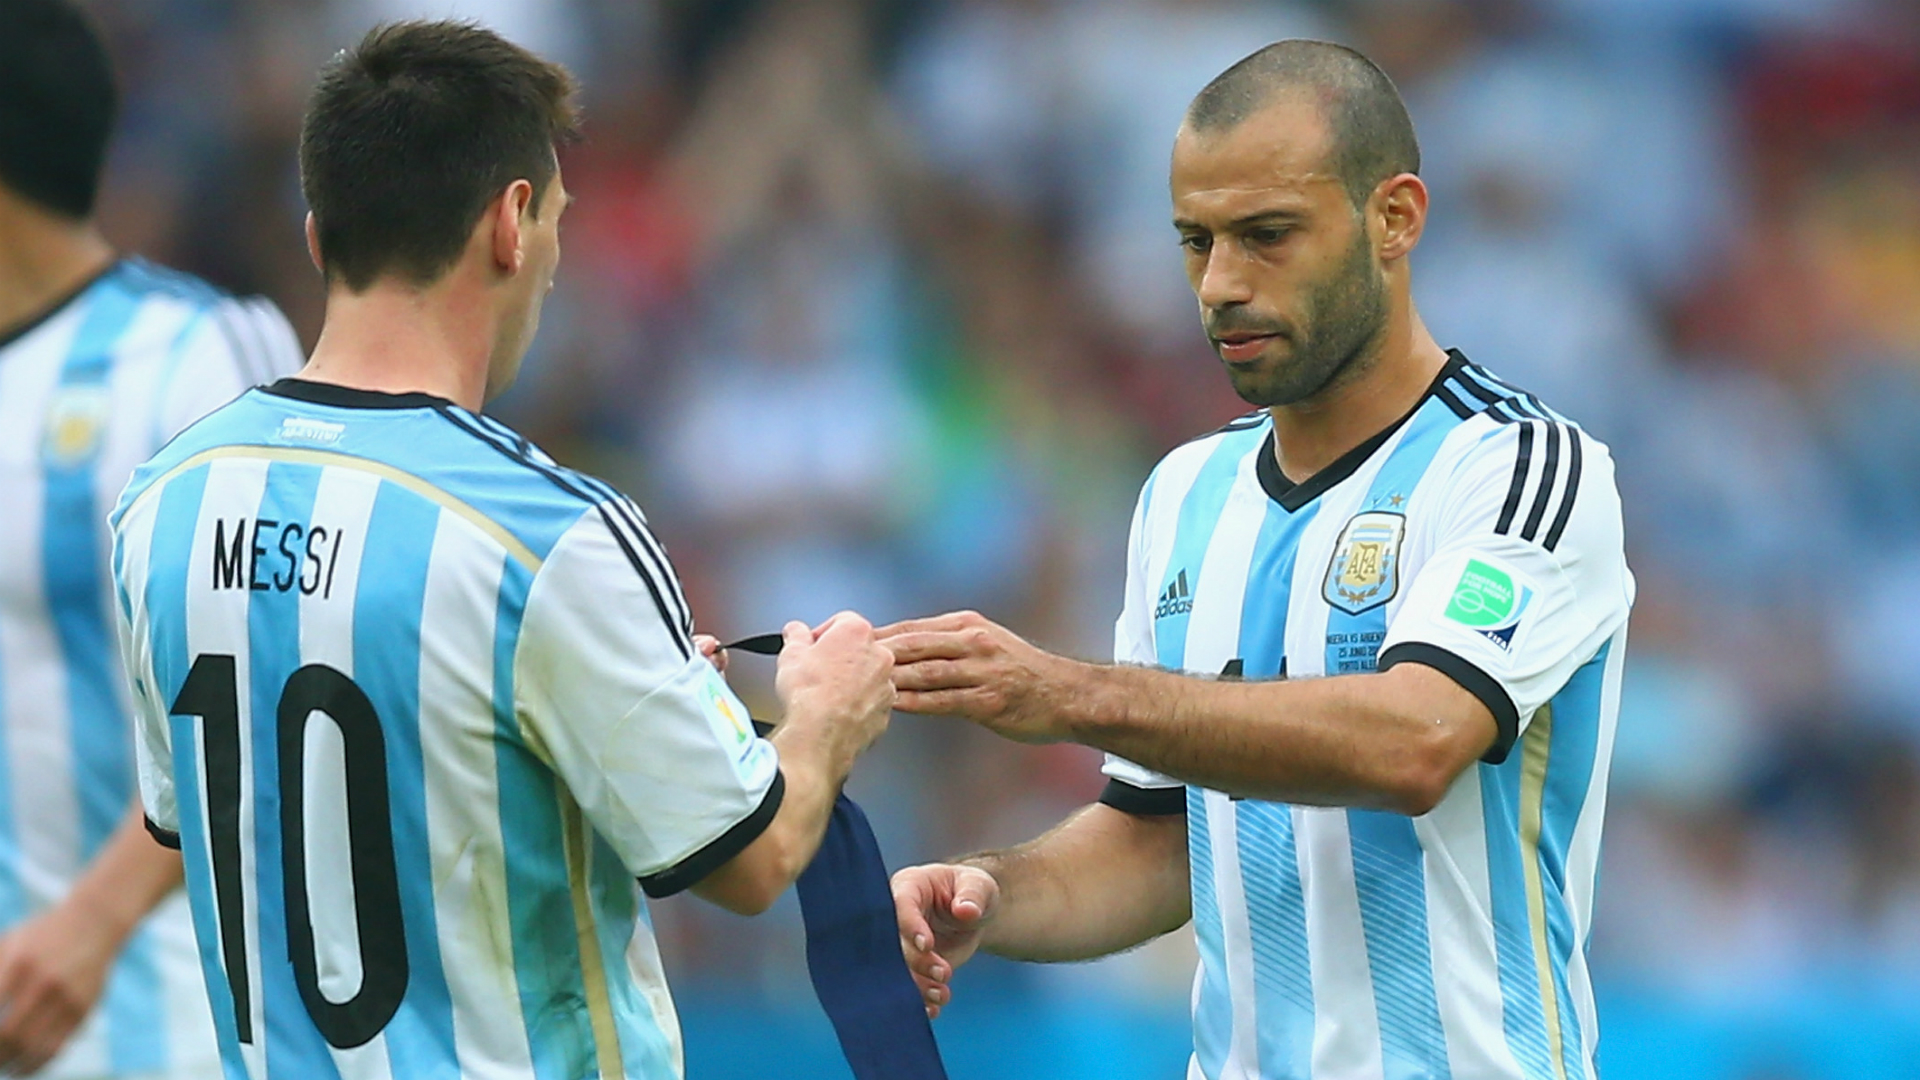 Lionel Messi: When Javier Mascherano goes crazy, stay out of his way